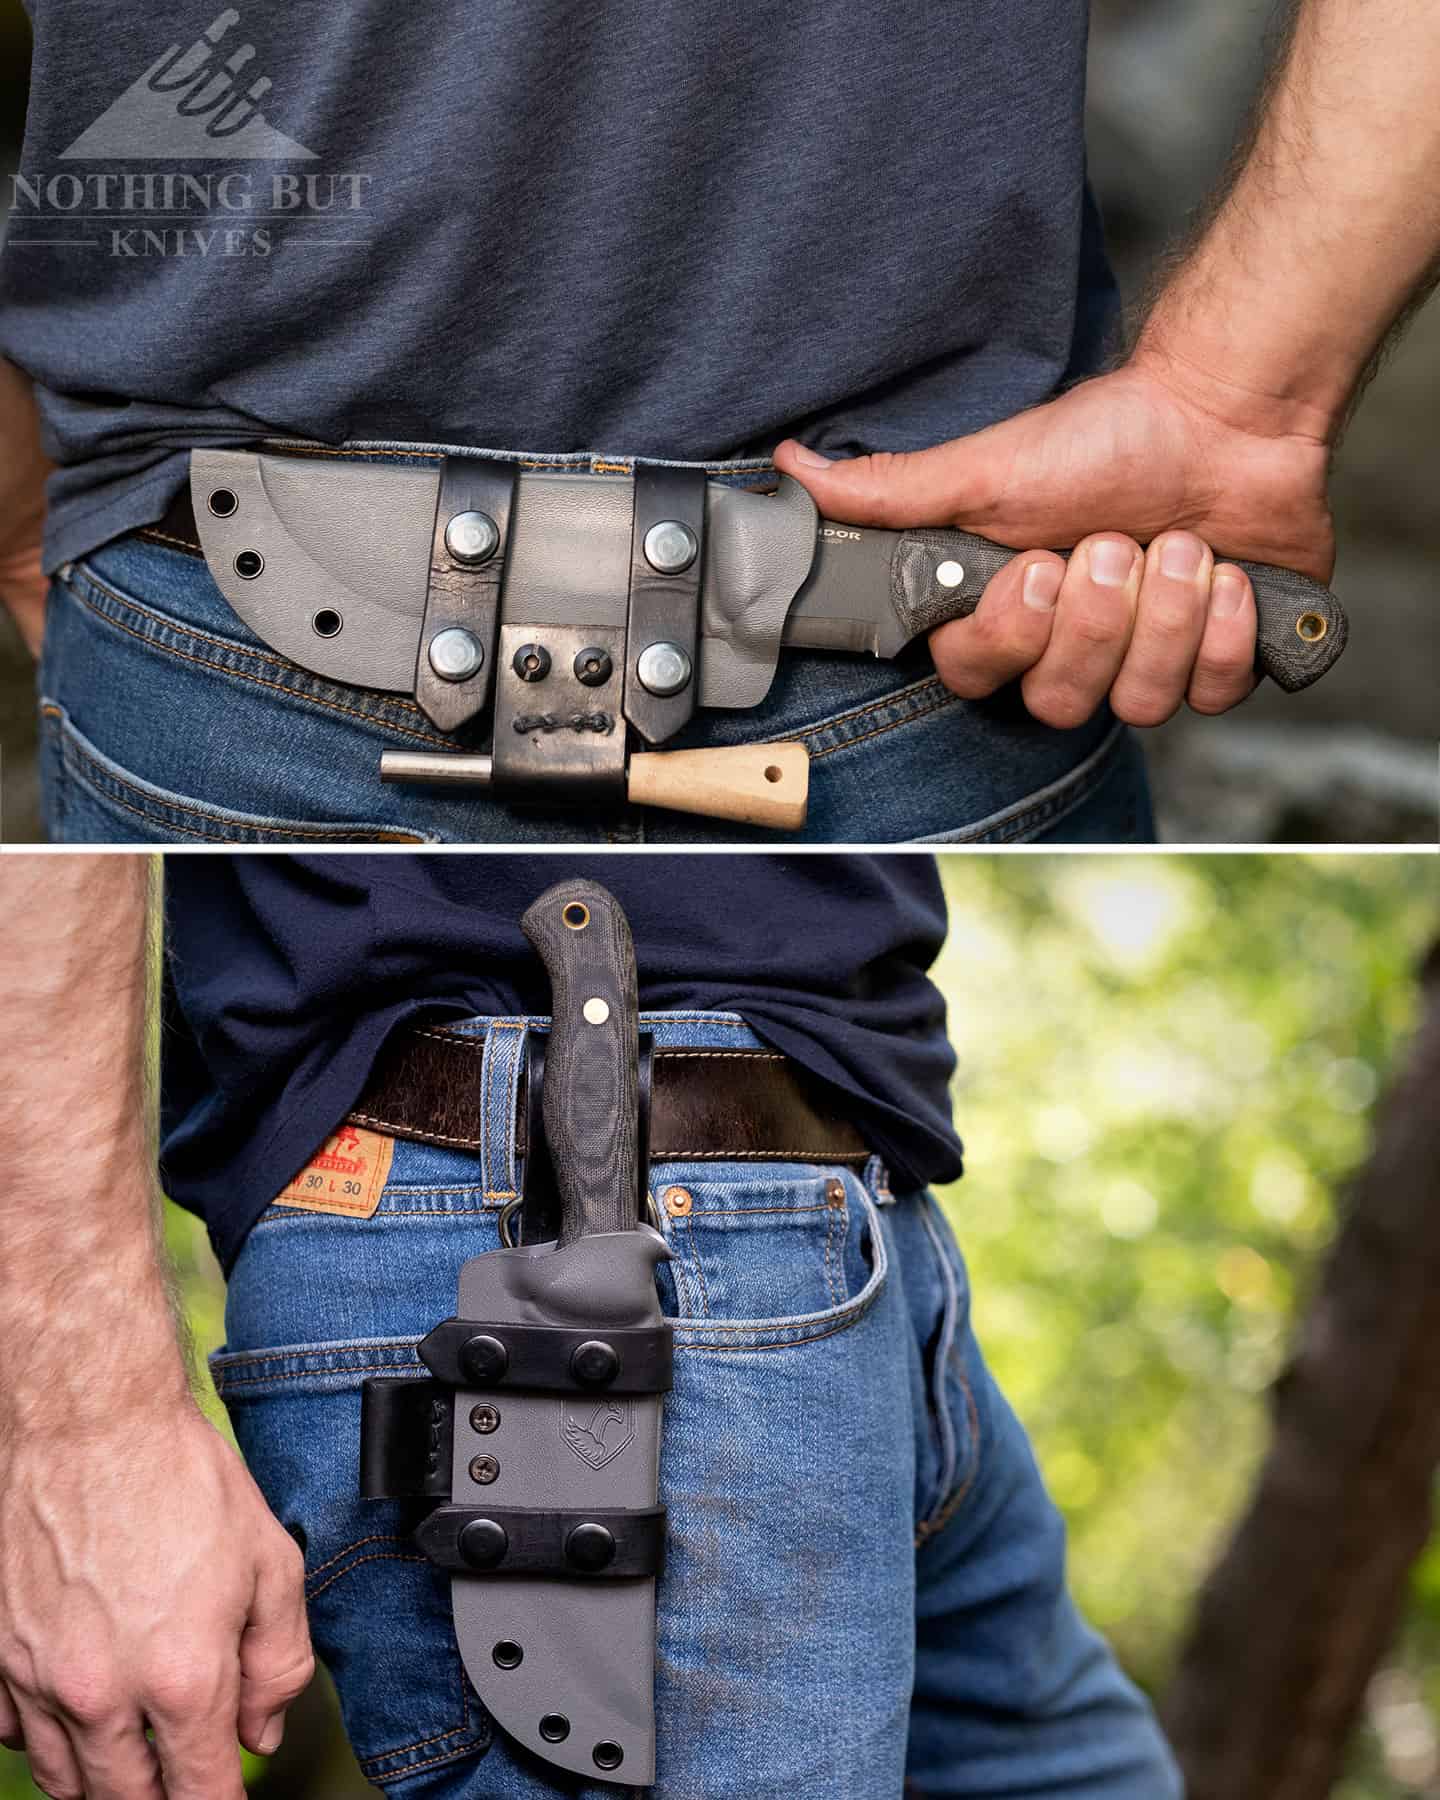 The kydex sheath that ships with the Condor SBK is tough and versatile. 